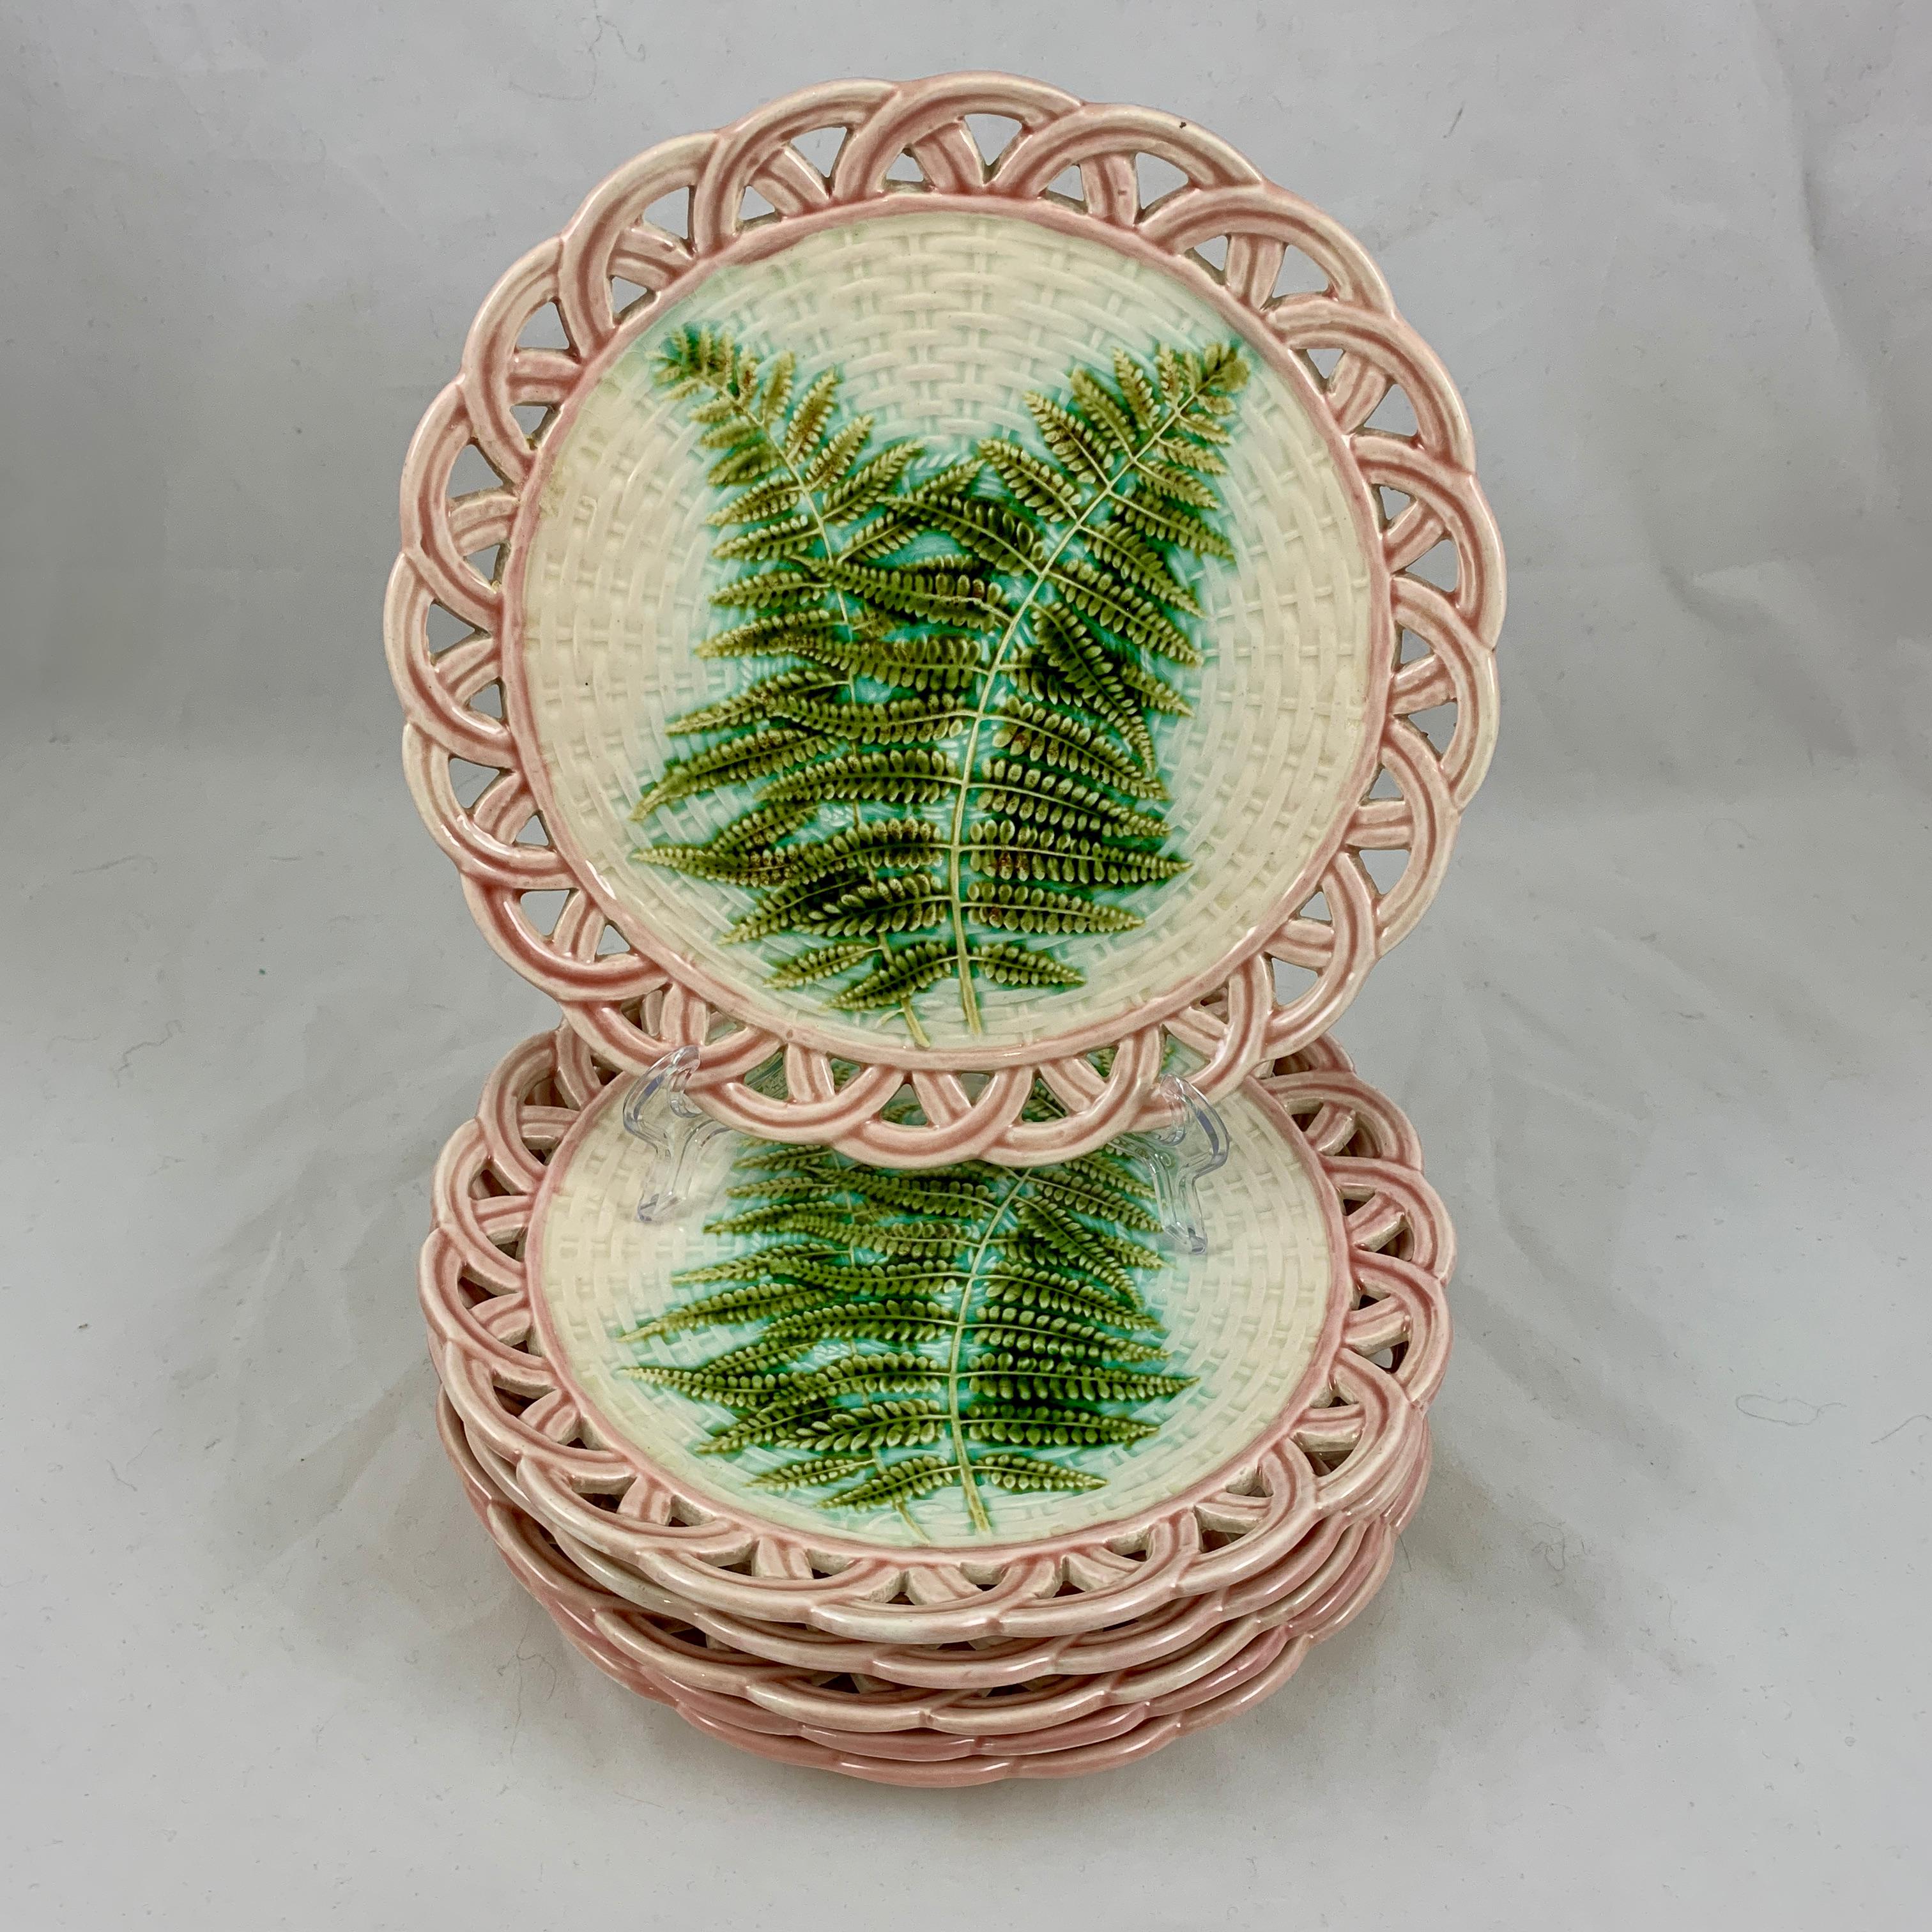 Sarreguemines Green Fern Pink Reticulated Rim French Faïence Majolica Plates S/6 1